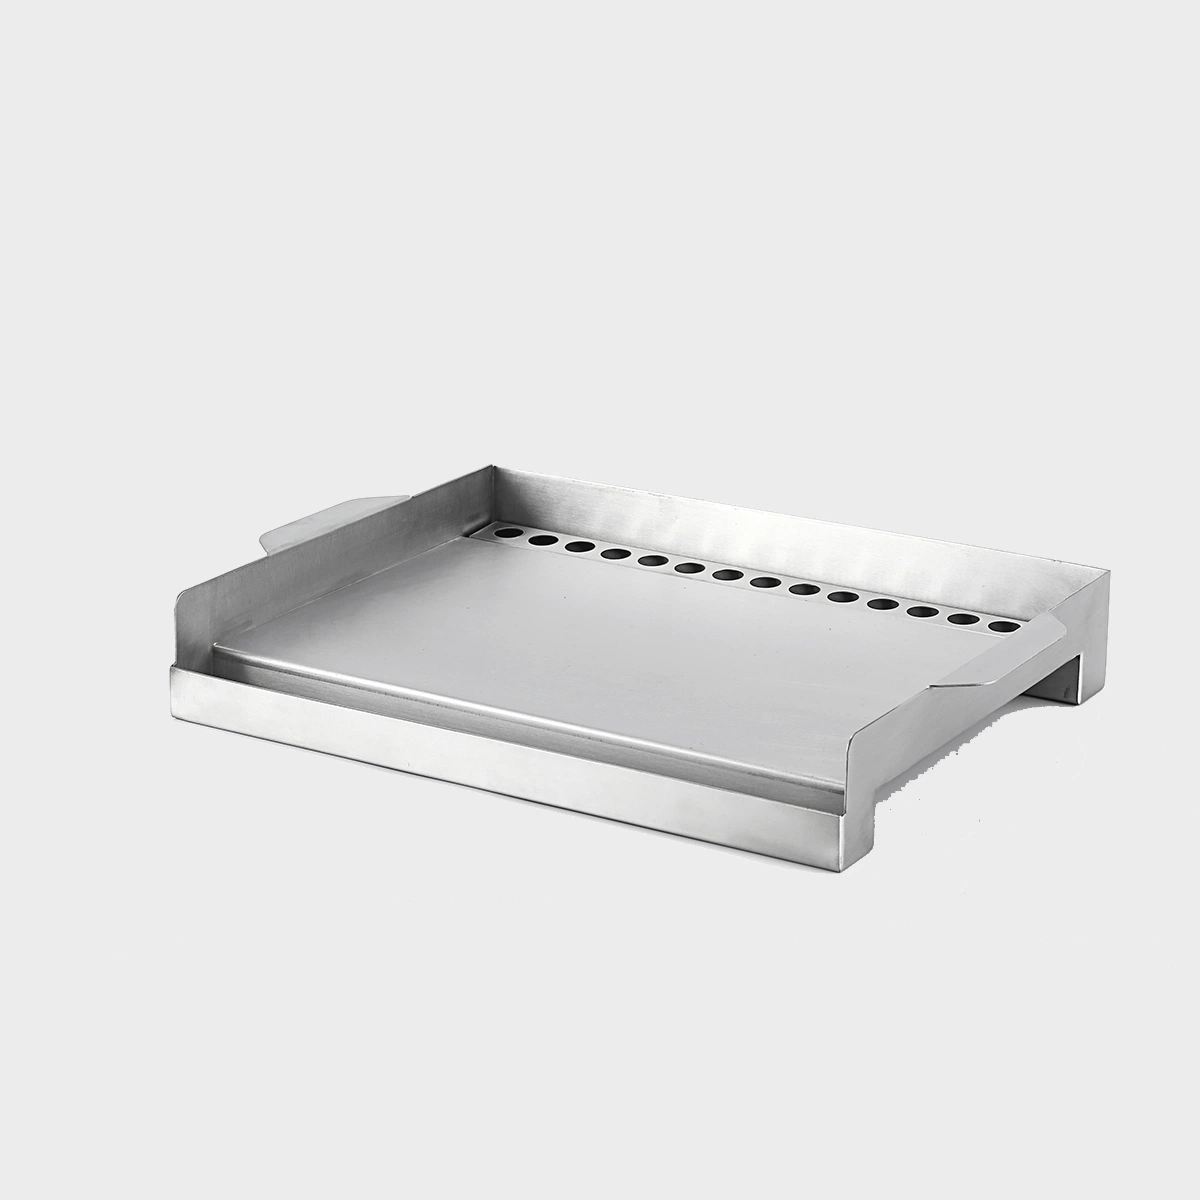 Rectangular BBQ Griddle Grills Stainless Steel with Meat Rack